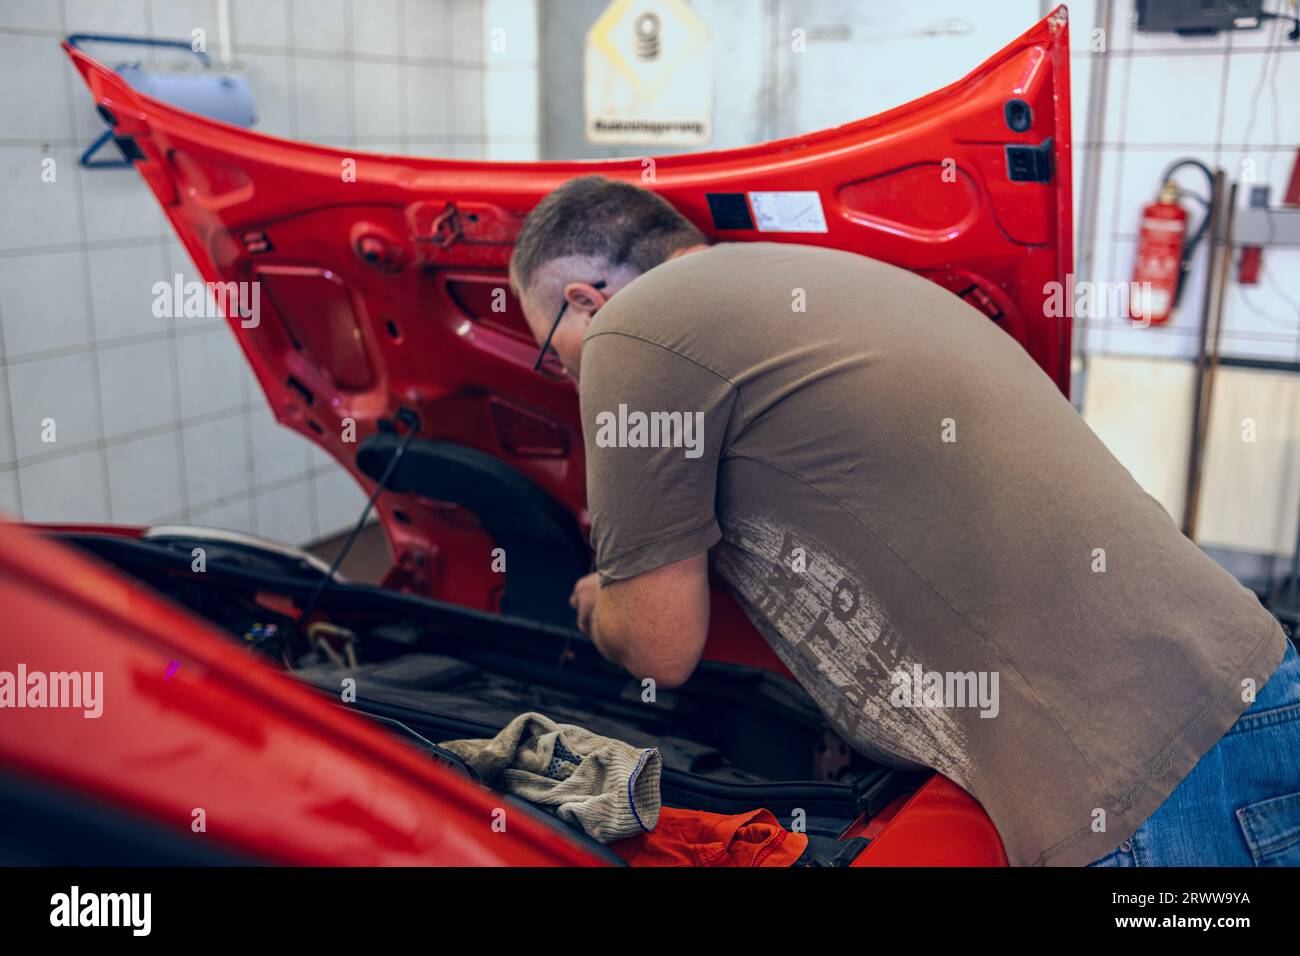 A Man with glasses Maintains a Car in a Garage. Car Repair by an experienced Specialist in a Car Repair Shop. Replacing the oil and filter in the car. Stock Photo